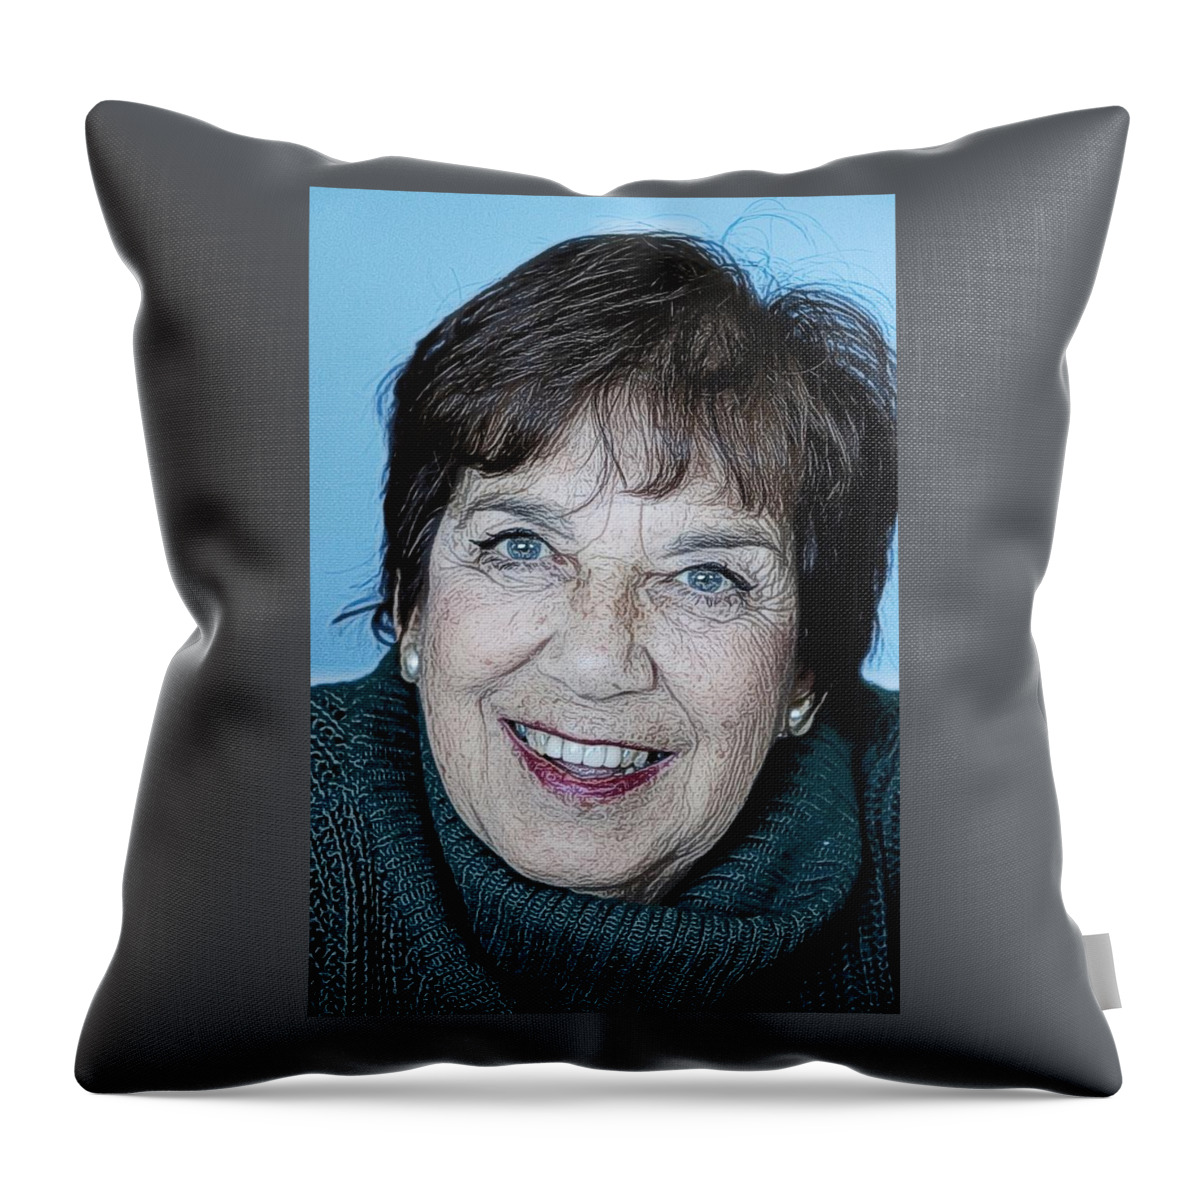 Photoshopped Image Throw Pillow featuring the digital art Kathleen by Steve Glines